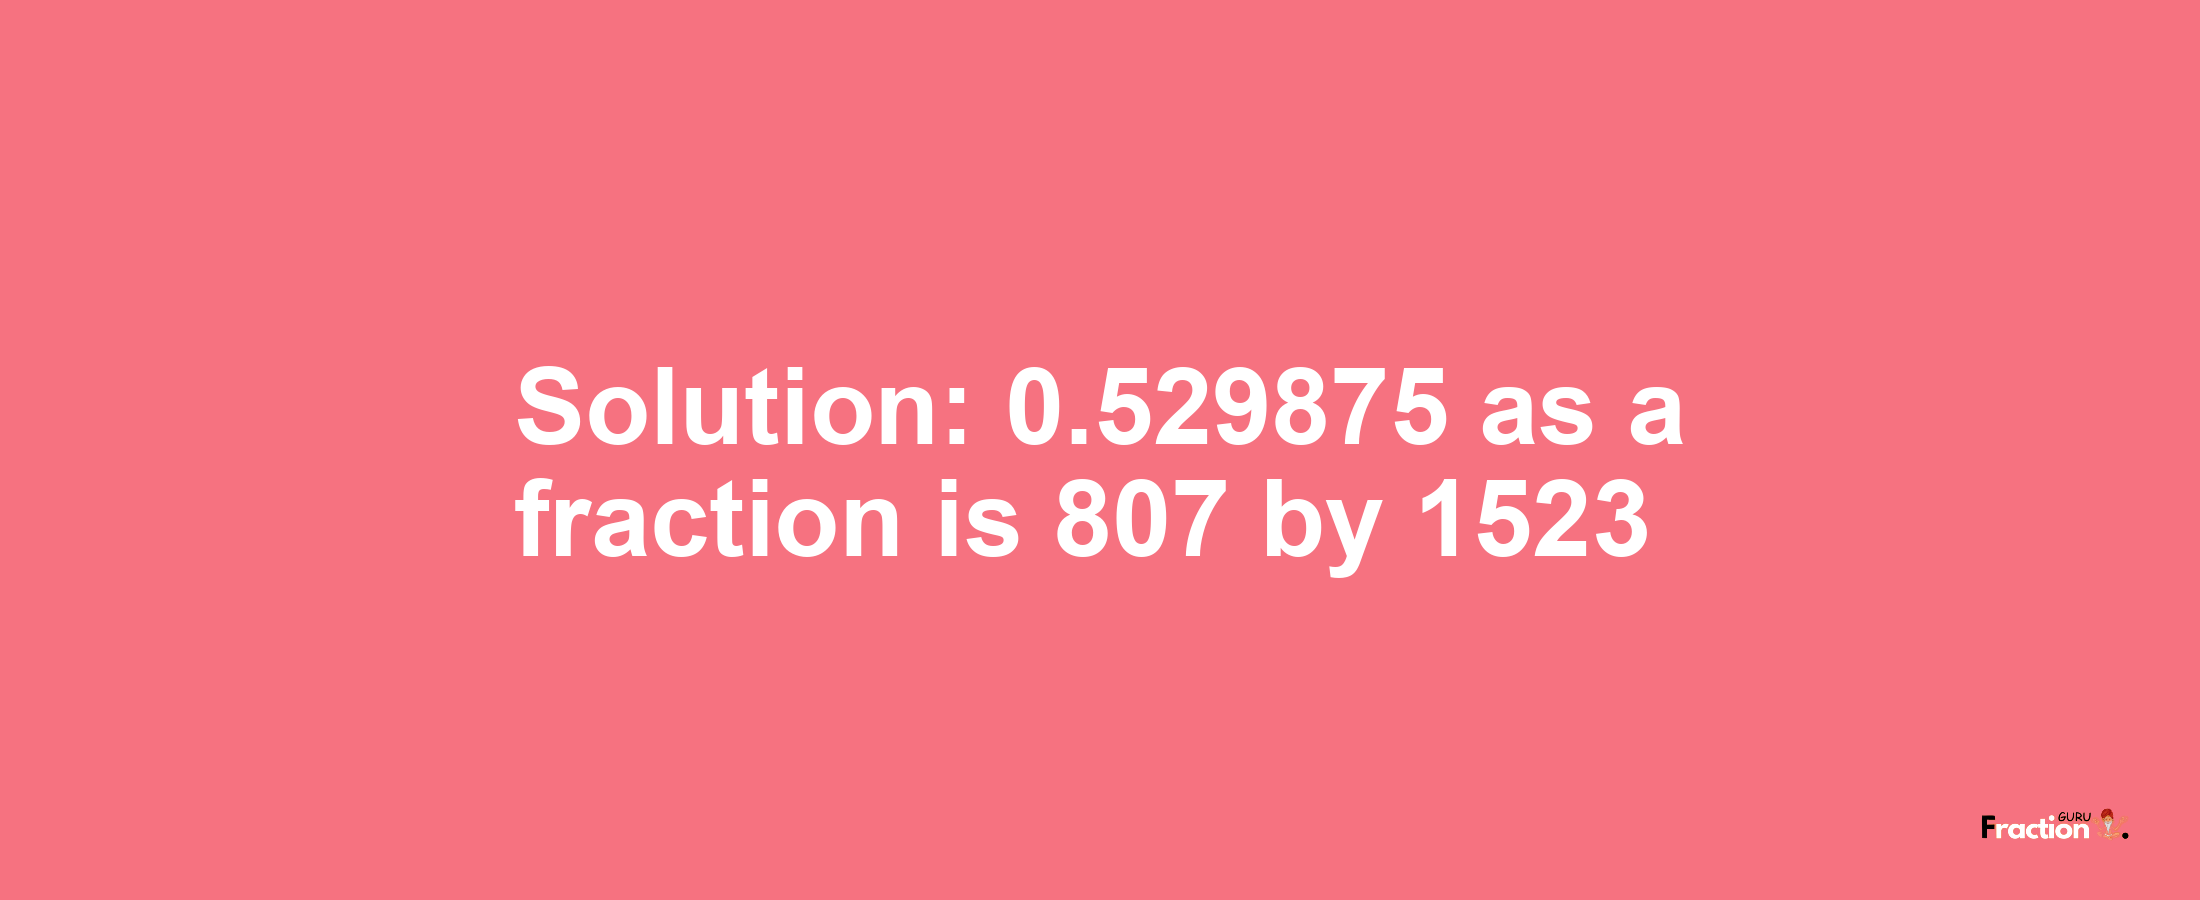 Solution:0.529875 as a fraction is 807/1523